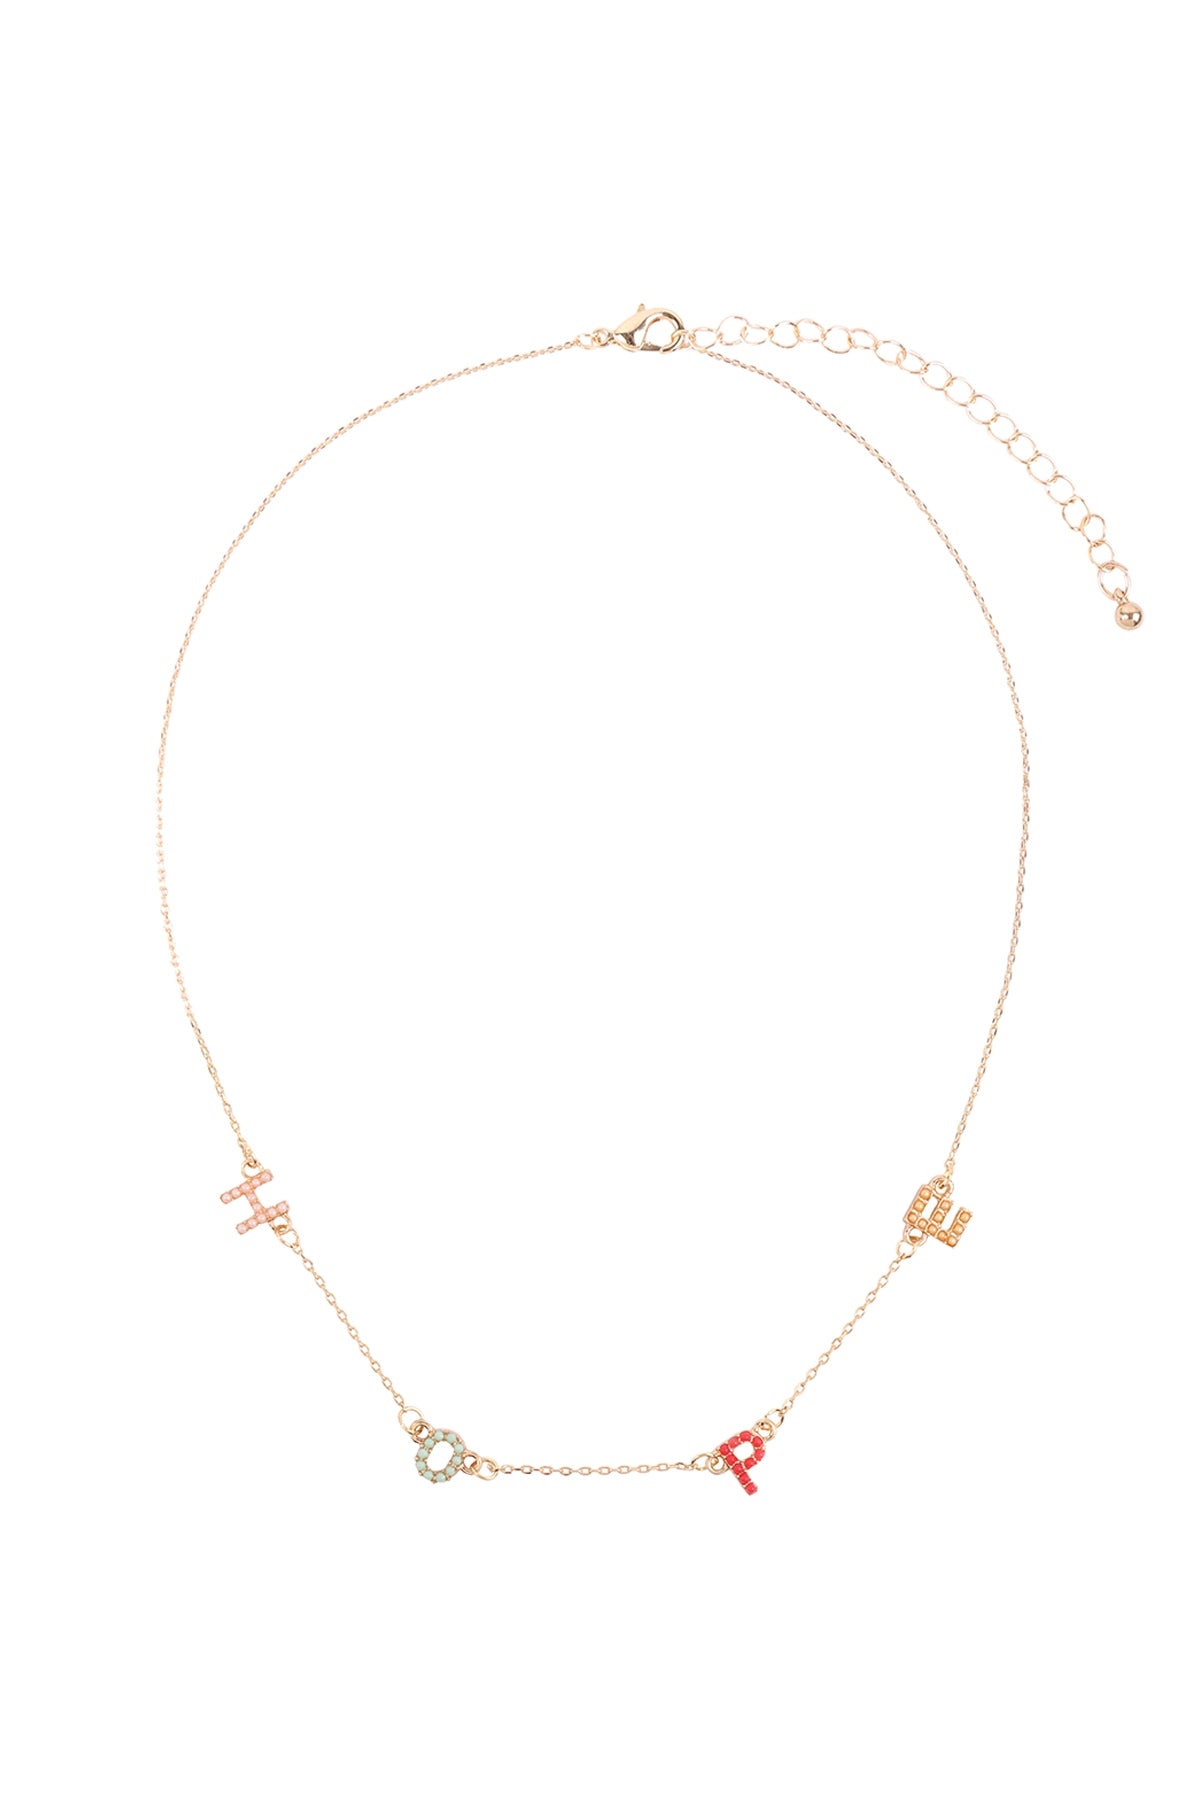 HOPE RHINESTONE COLORED STATIONARY NECKLACE/6PCS (NOW $1.25 ONLY!)